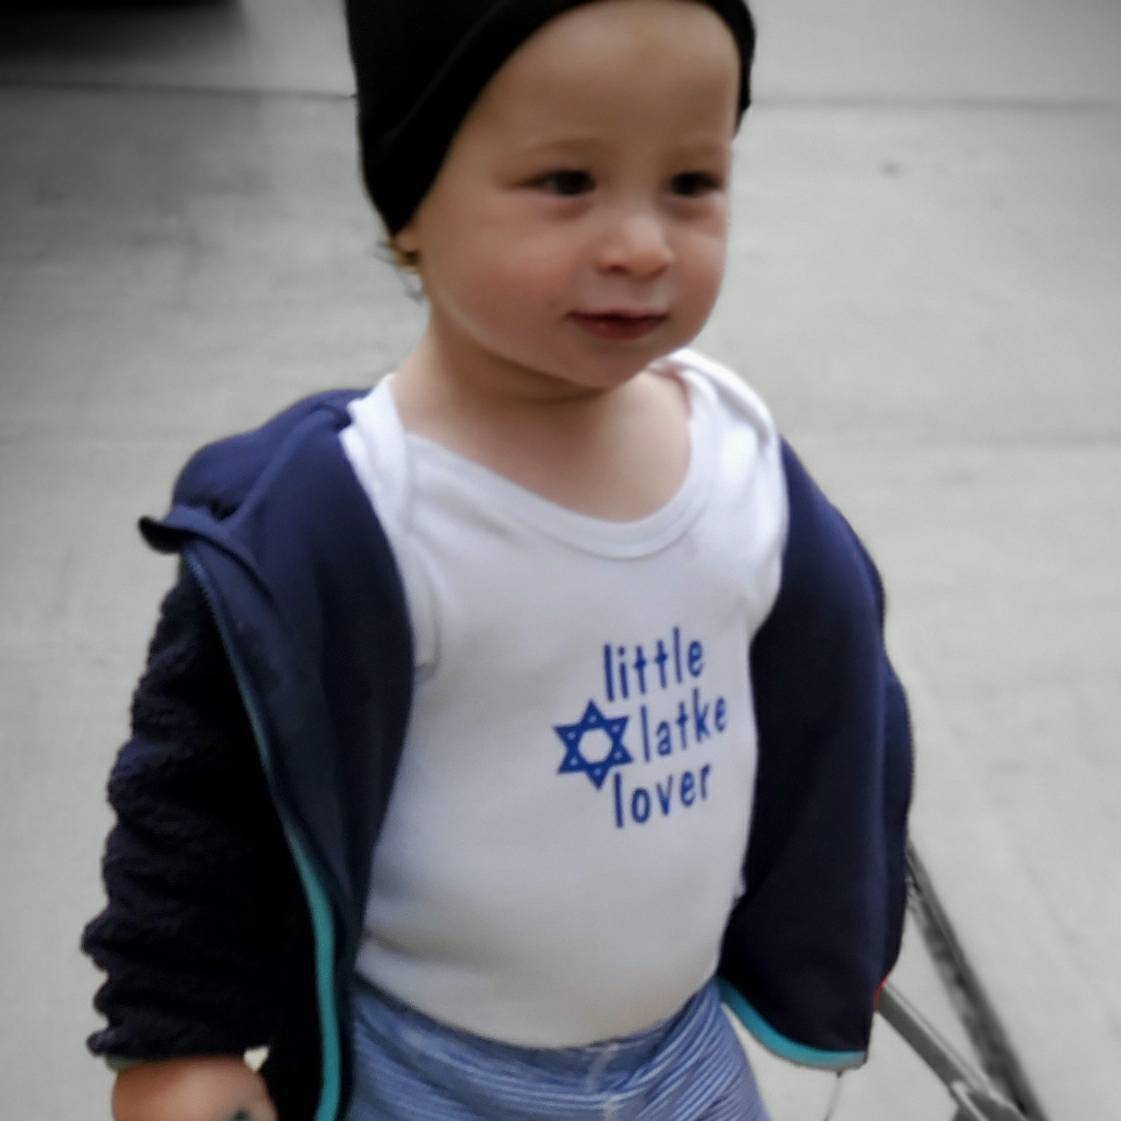 Rollin' with the Homies Chanukah Outfit or T-Shirt Salt and Sparkle